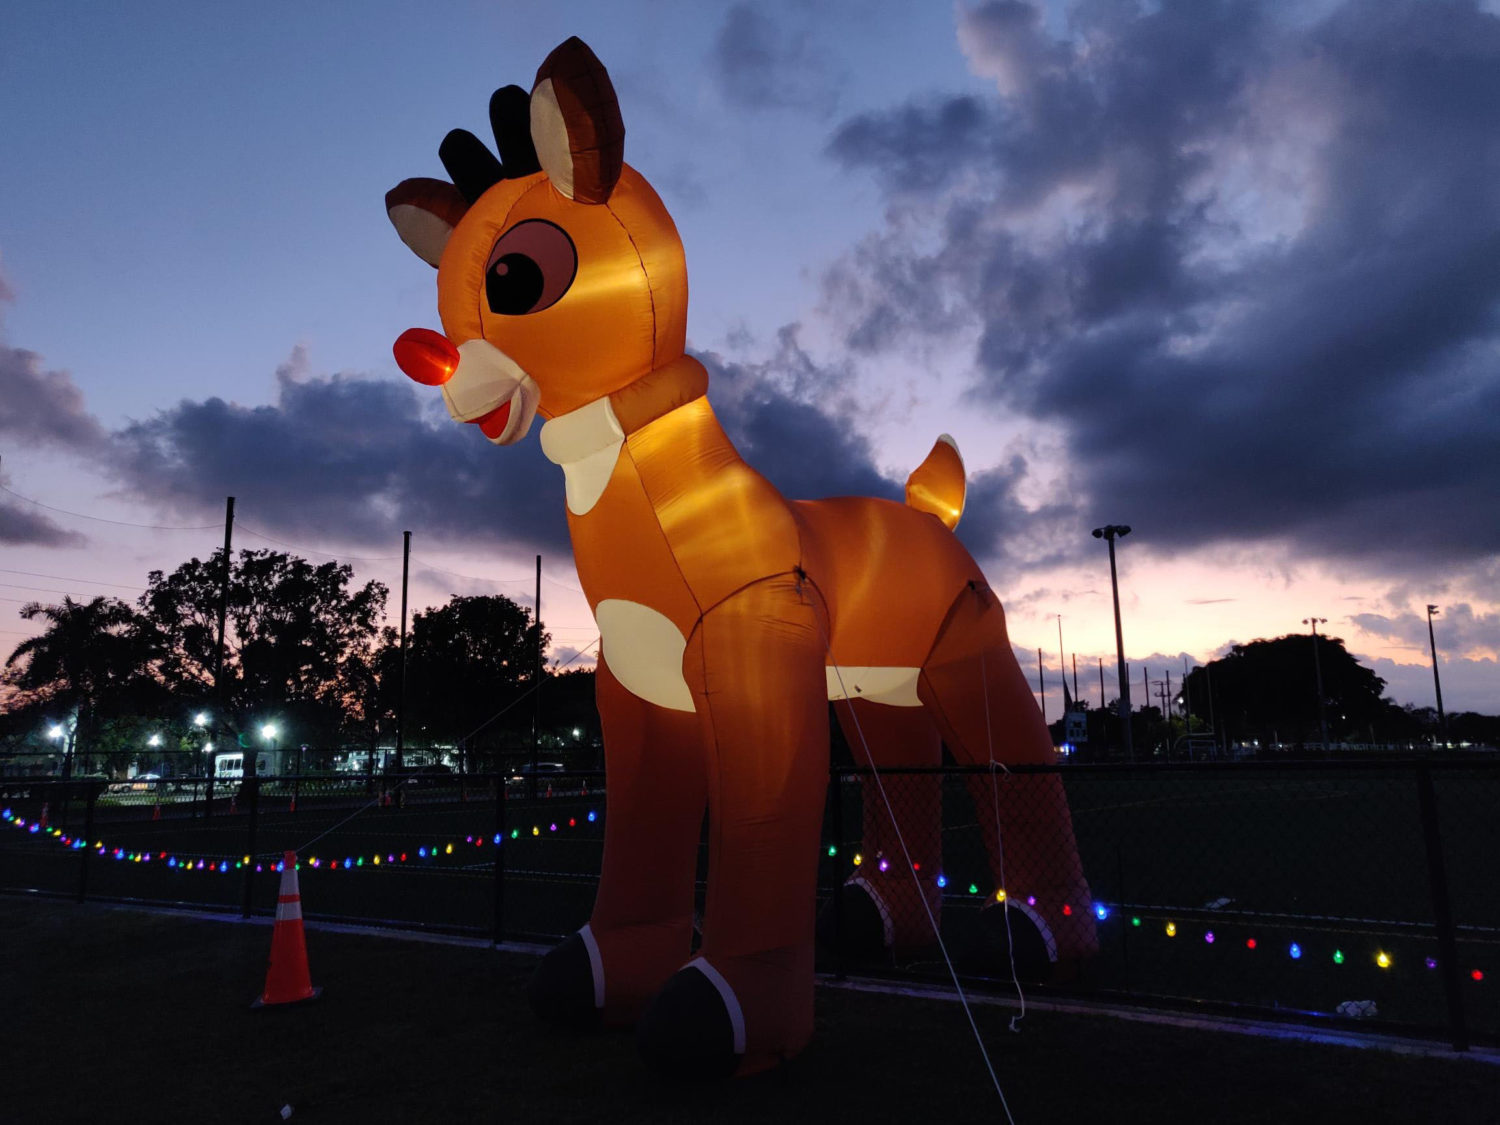 Over 1,500 Attend Tamarac's Tinsel Town Drive-Thru and Other Holiday Events